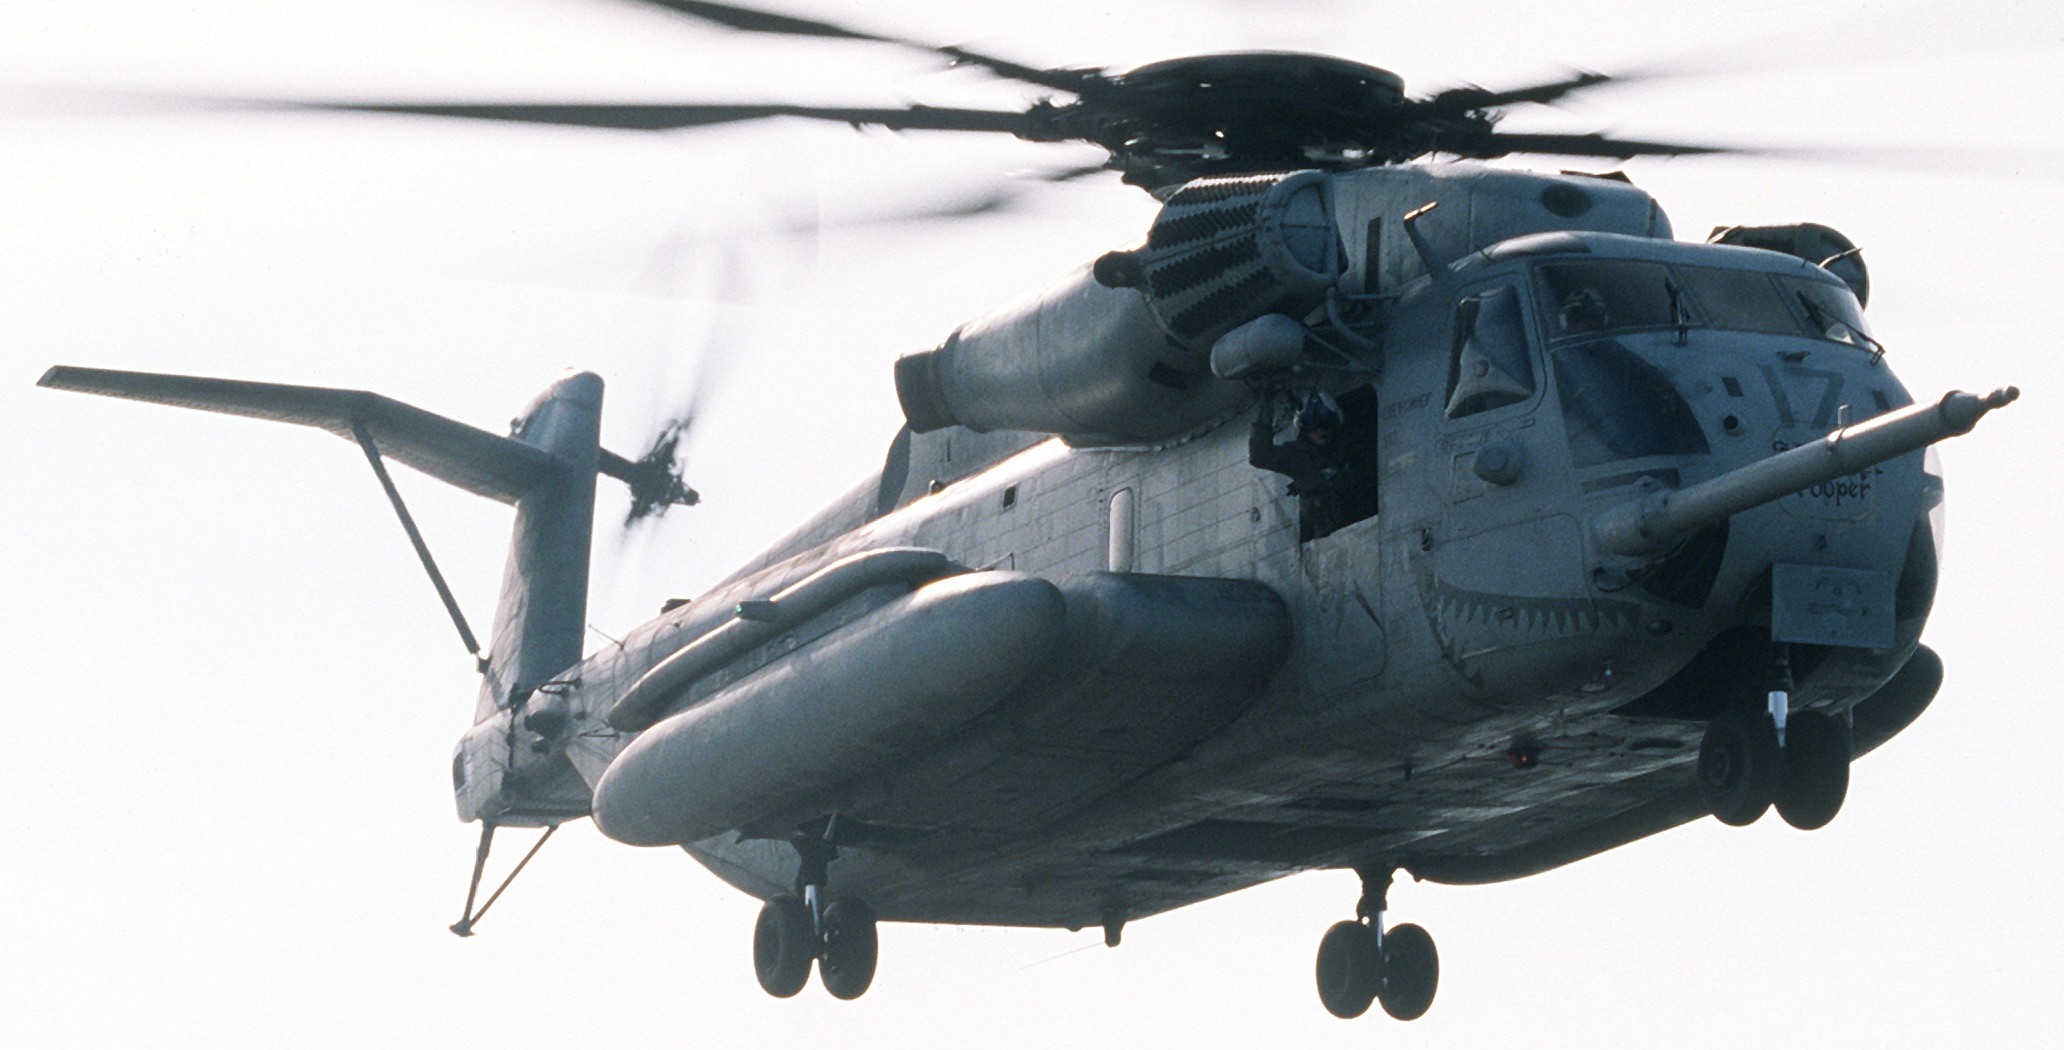 hmh-362 ugly angels marine heavy helicopter squadron usmc sikorsky ch-53d sea stallion 22 uss guadalcanal lph-7